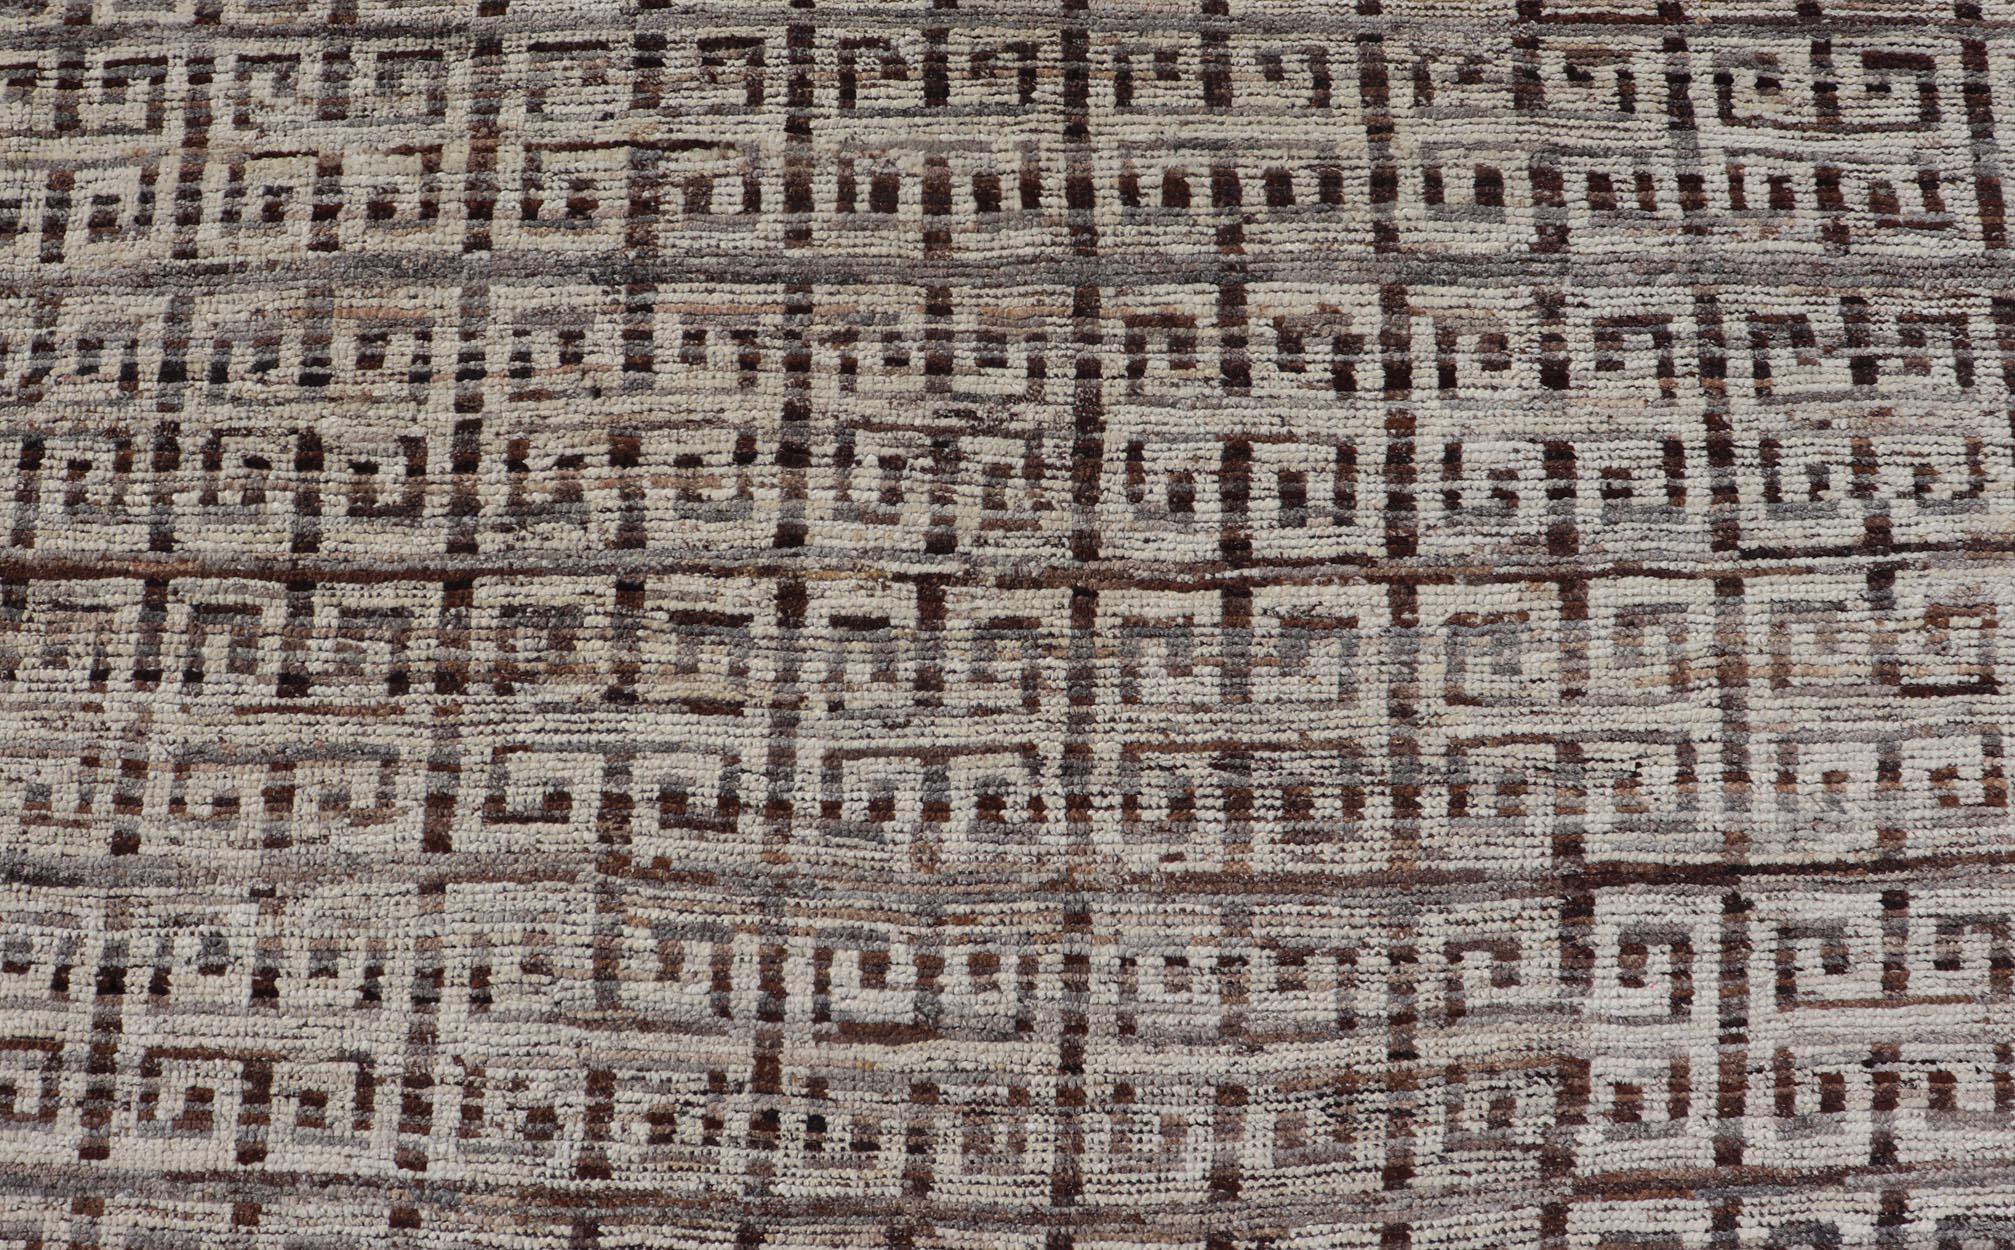 This modern casual rug has been hand-knotted. The rug features a modern all-over geometric Greek key design, rendered in earthy tones; making this rug a superb fit for a variety of classic, modern, casual and minimalist interiors.
Measures: 10'8 x